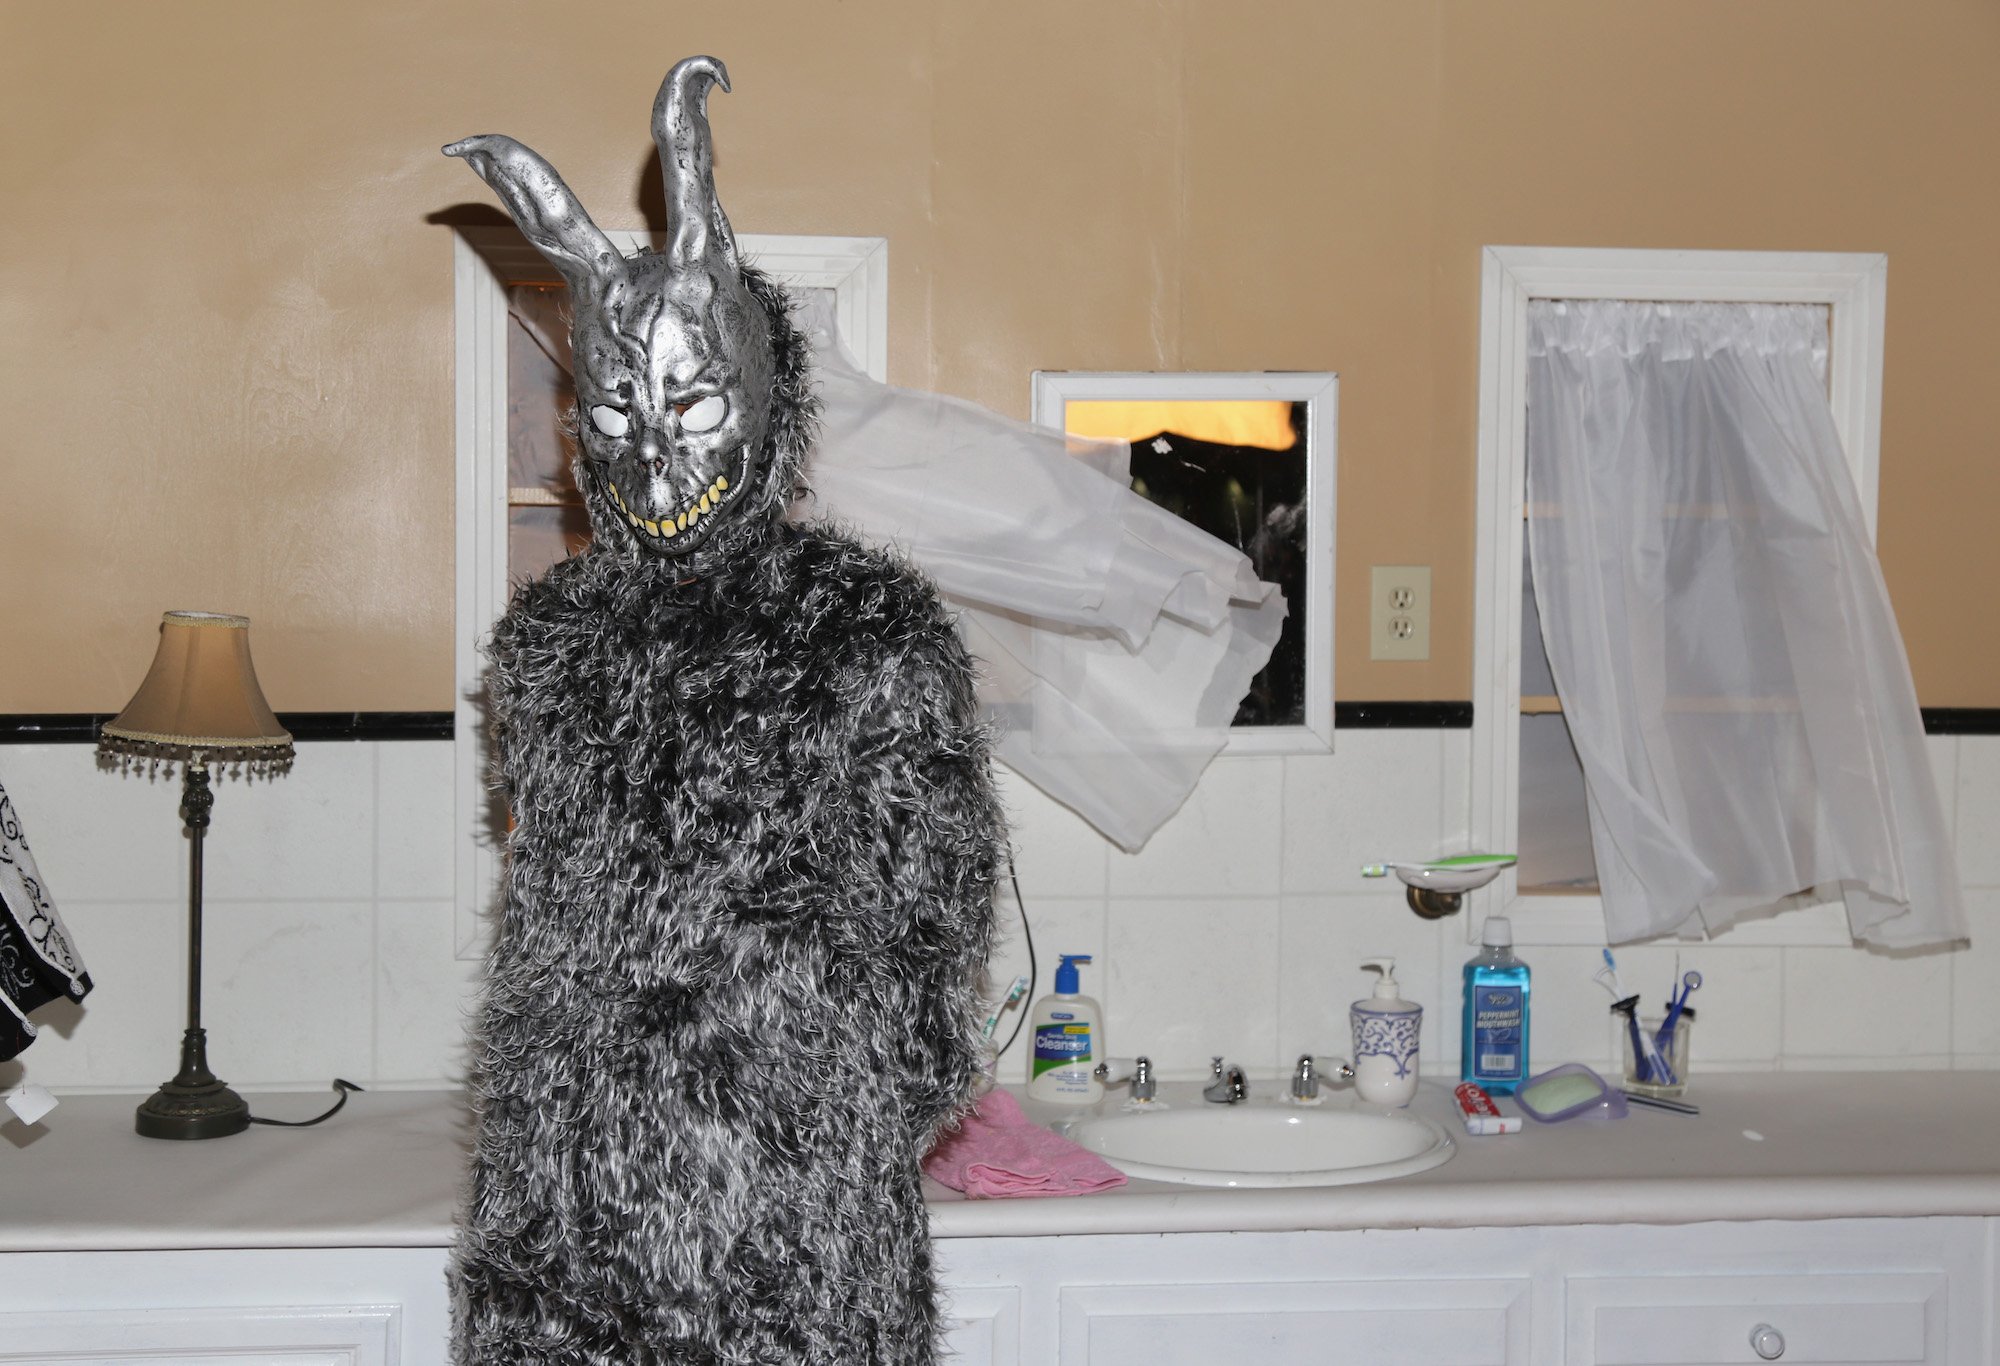 donnie-darko-alternate-ending-was-so-horrific-the-film-wouldn-t-have